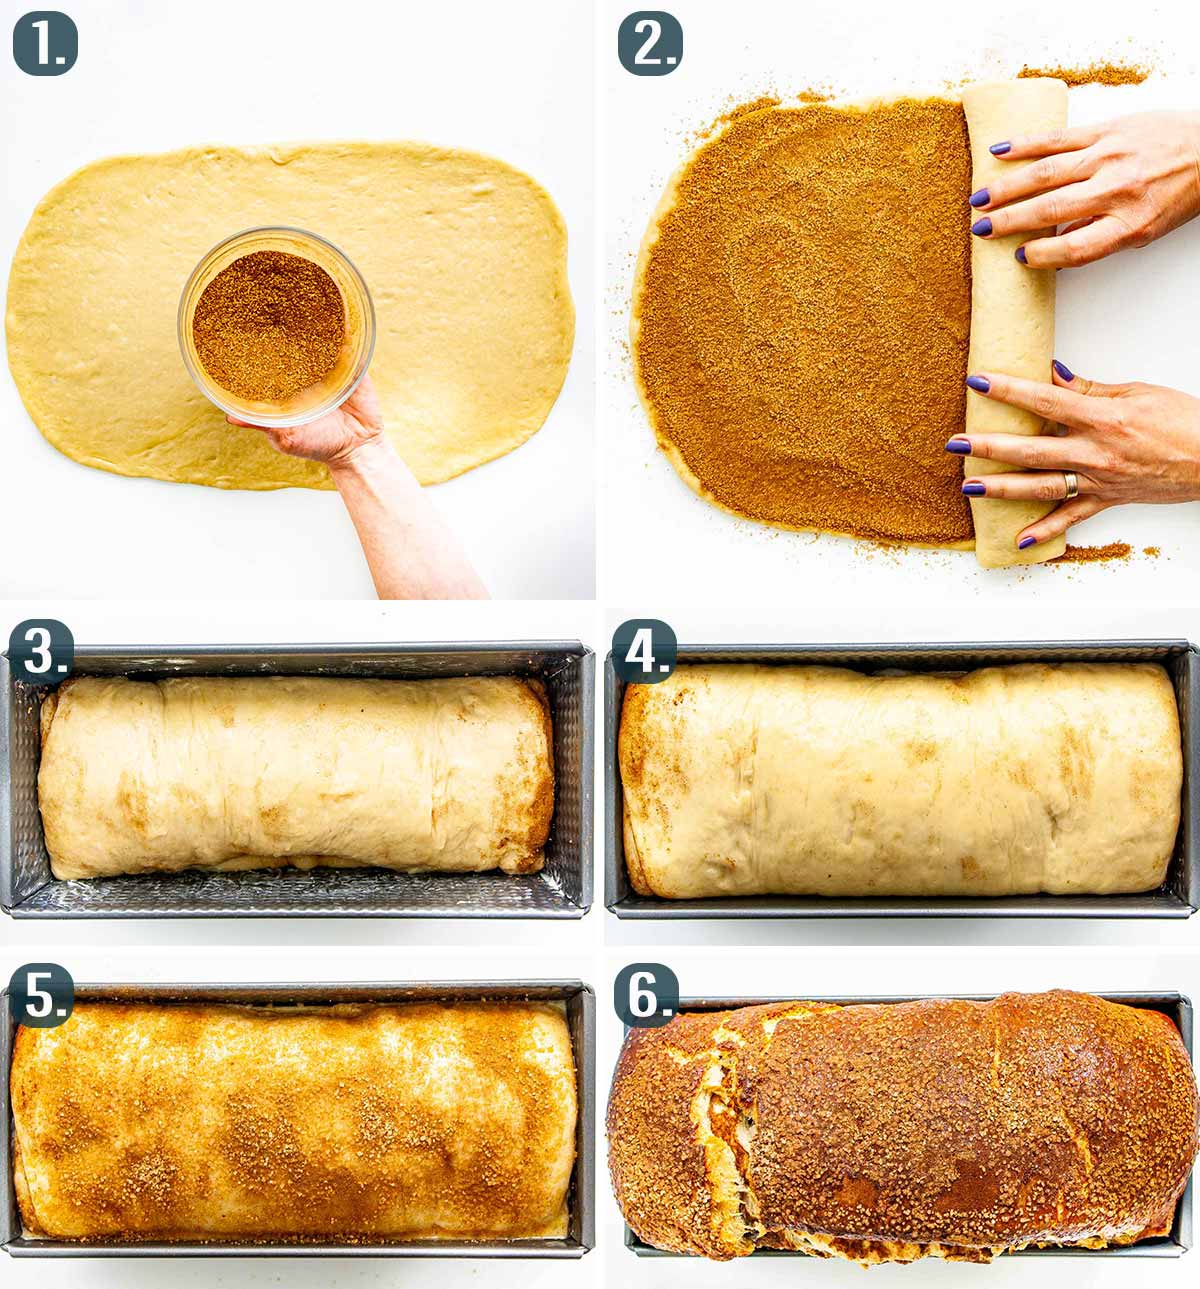 detailed process shots showing how to assemble cinnamon bread.